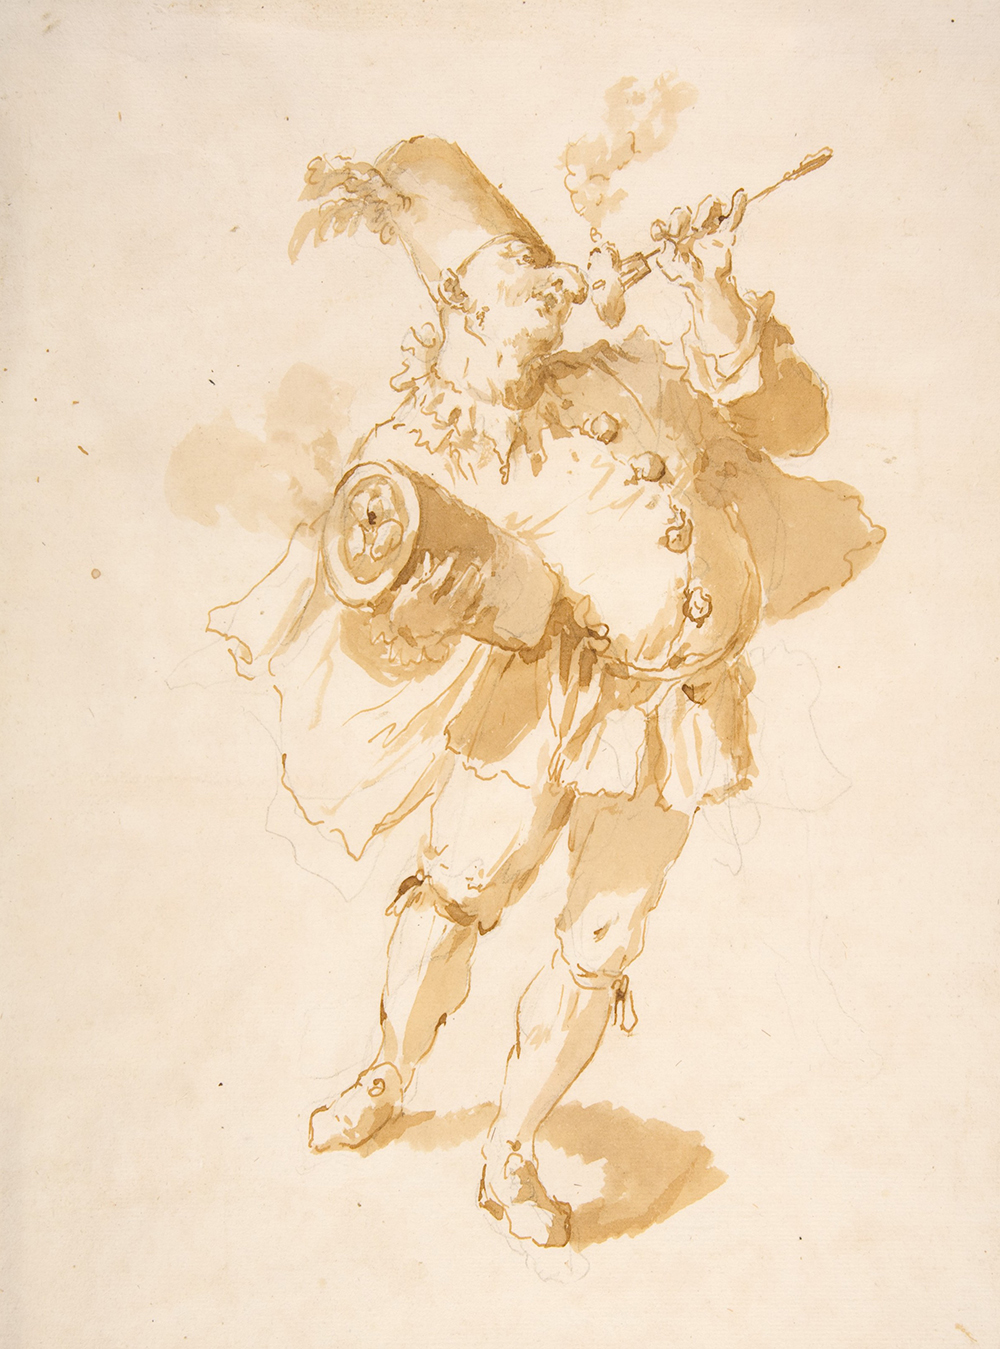 Punchinello with Dumpling or Fritter, by the Circle of Giovanni Battista Tiepolo, c. 1696. The Metropolitan Museum of Art, Bequest of Harry G. Sperling, 1971.